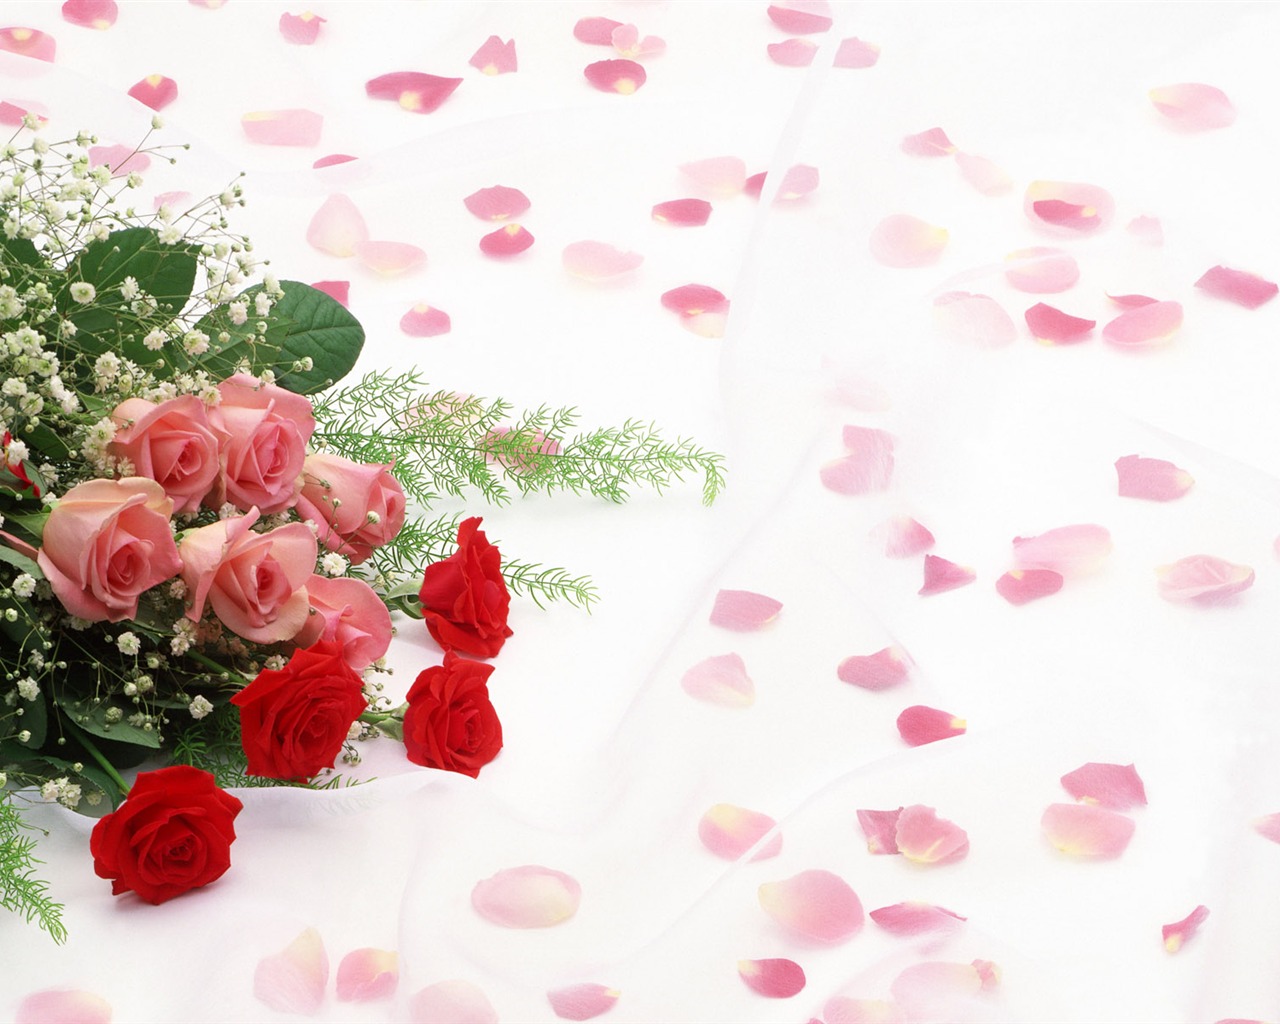 Wedding Flowers items wallpapers (1) #6 - 1280x1024